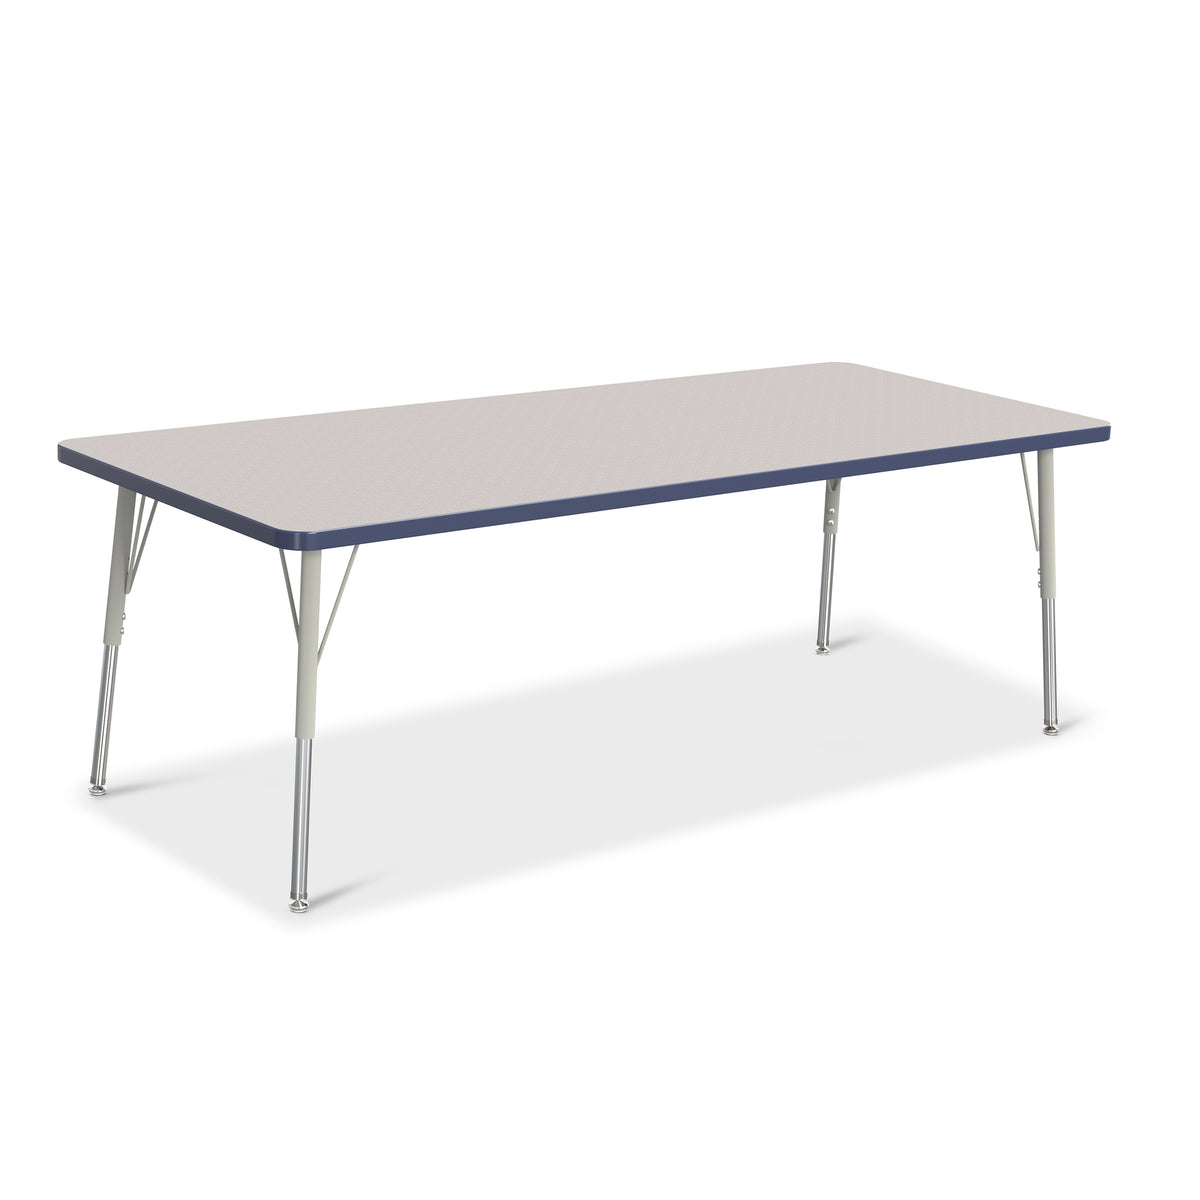 6413JCA112, Berries Rectangle Activity Table - 30" X 72", A-height - Freckled Gray/Navy/Gray